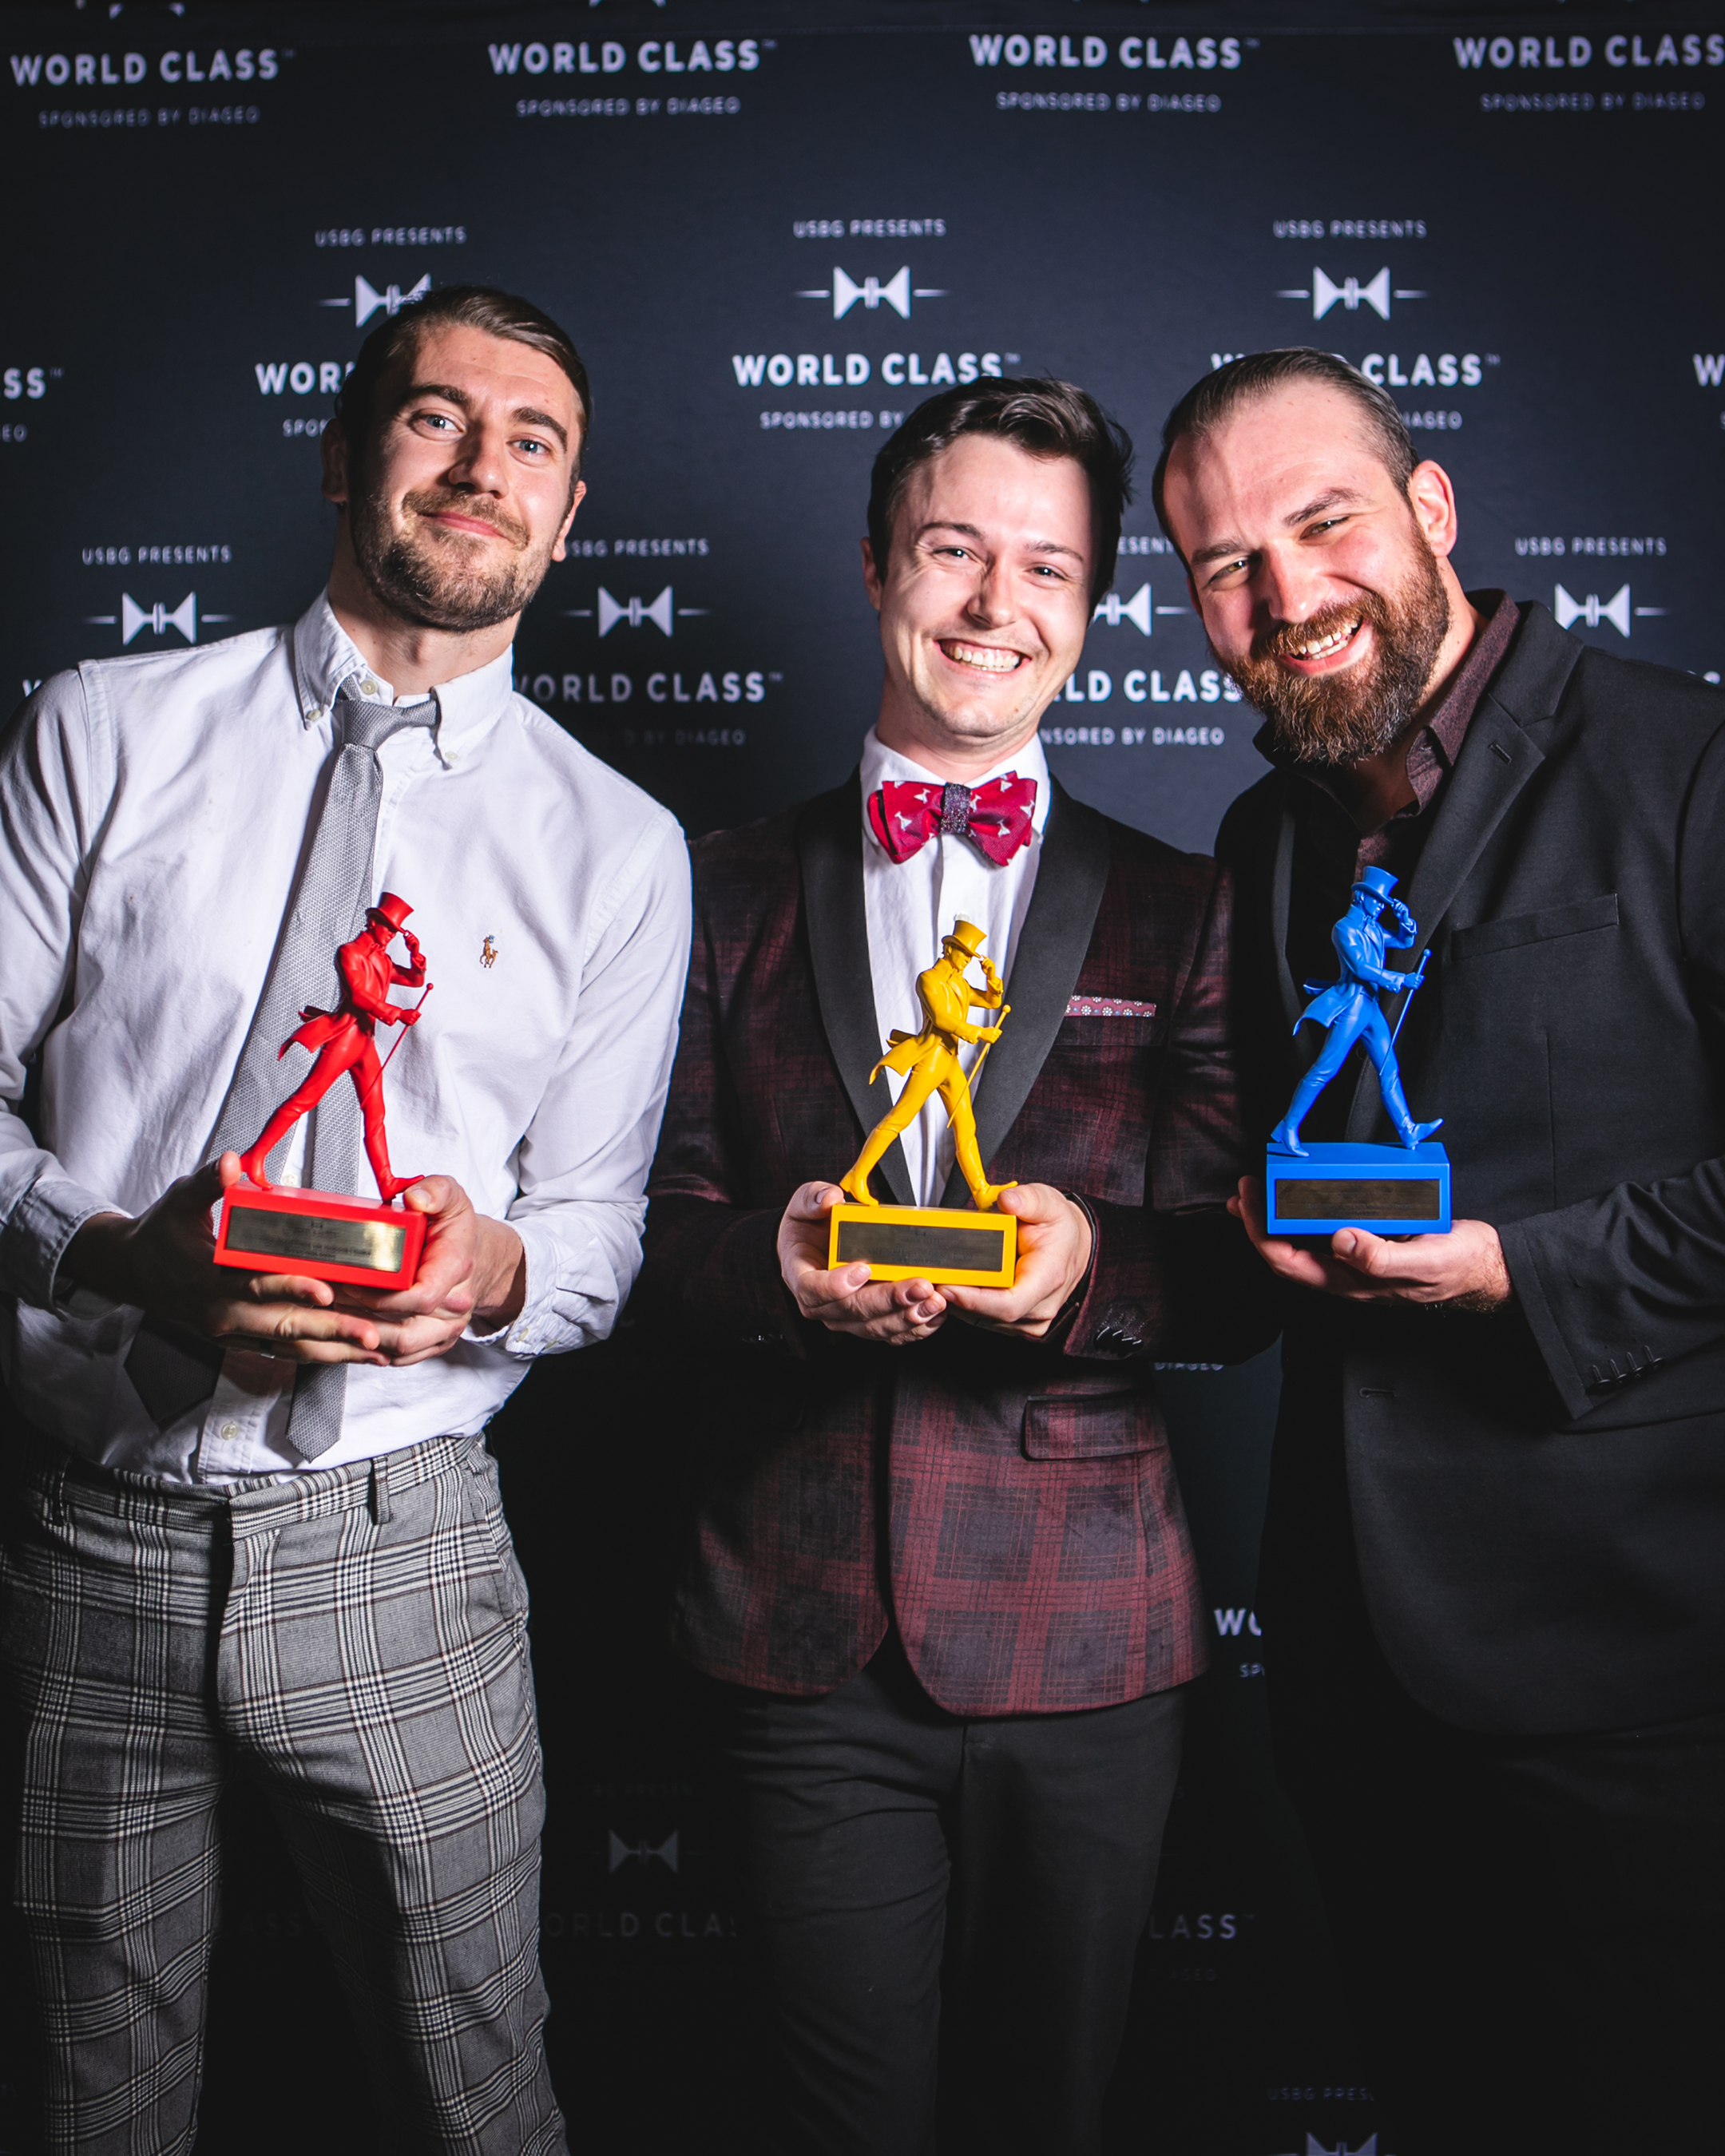 The top bartenders from the Southwest region – Conor O’Reilly, Weston Simons, Jake Powell – will gather in Nashville, TN to face off in the World Class U.S. National Finals.